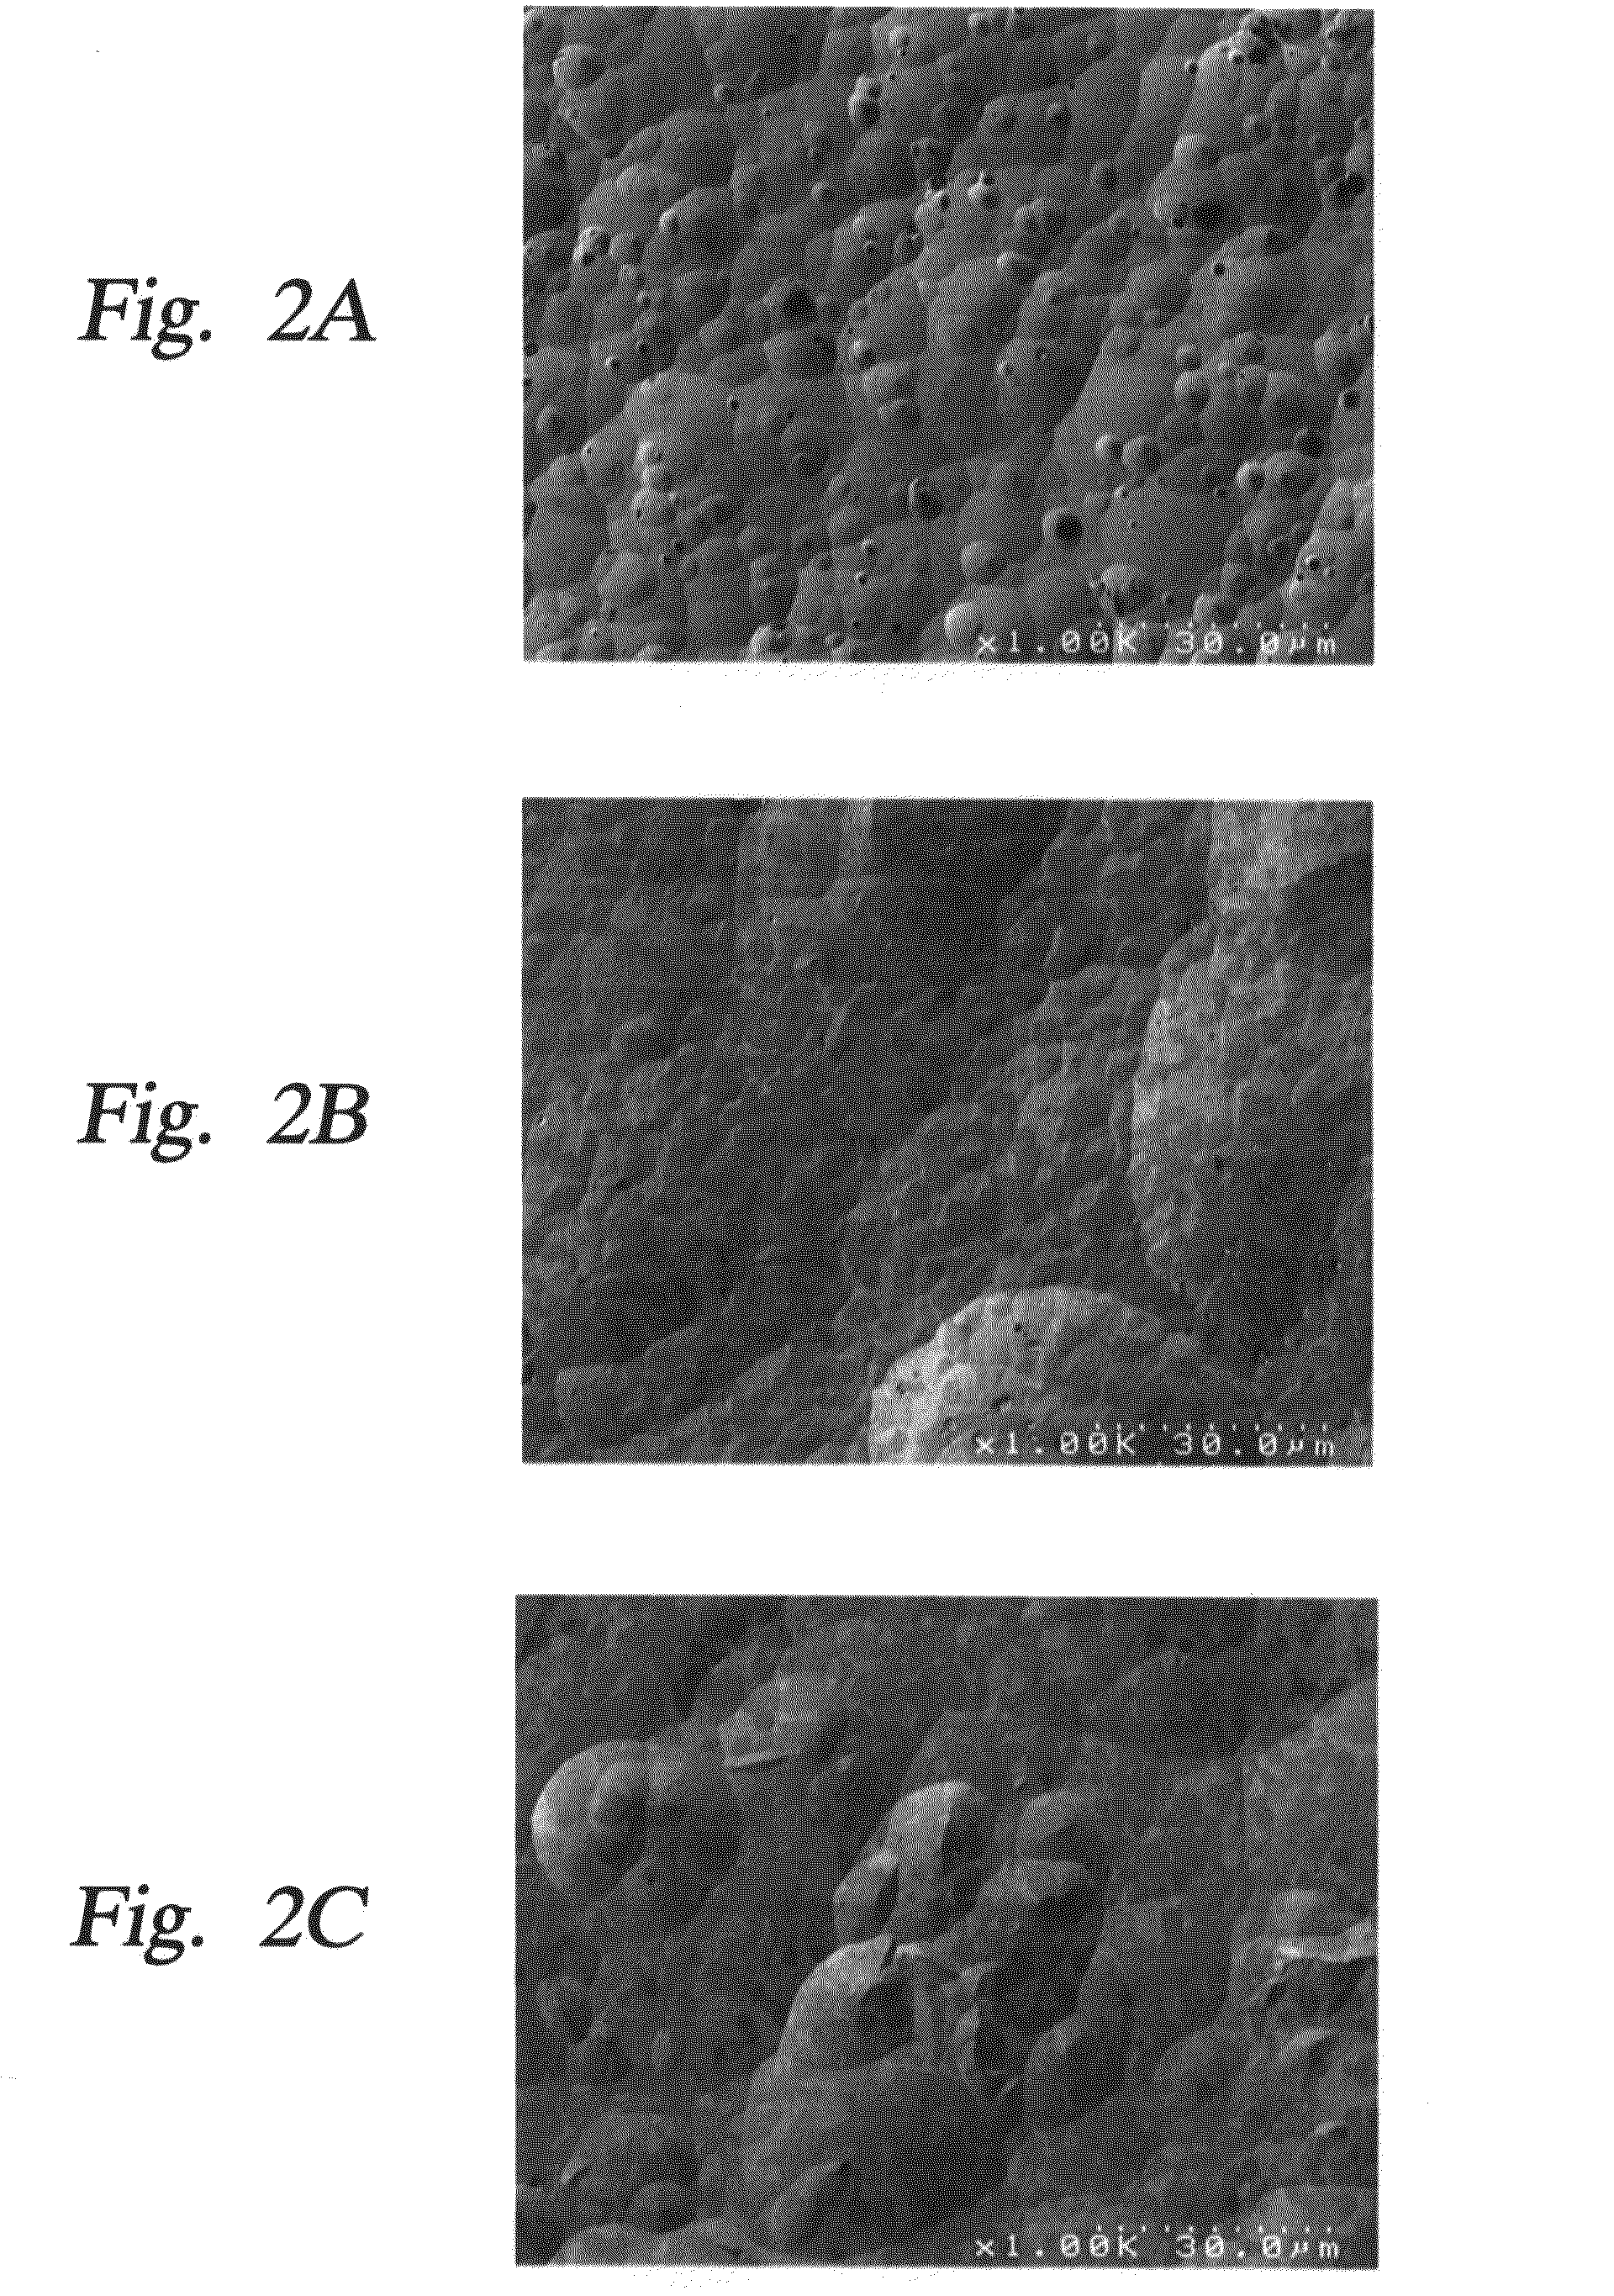 Semiconductor processing apparatus with a ceramic-comprising surface which exhibits fracture toughness and halogen plasma resistance